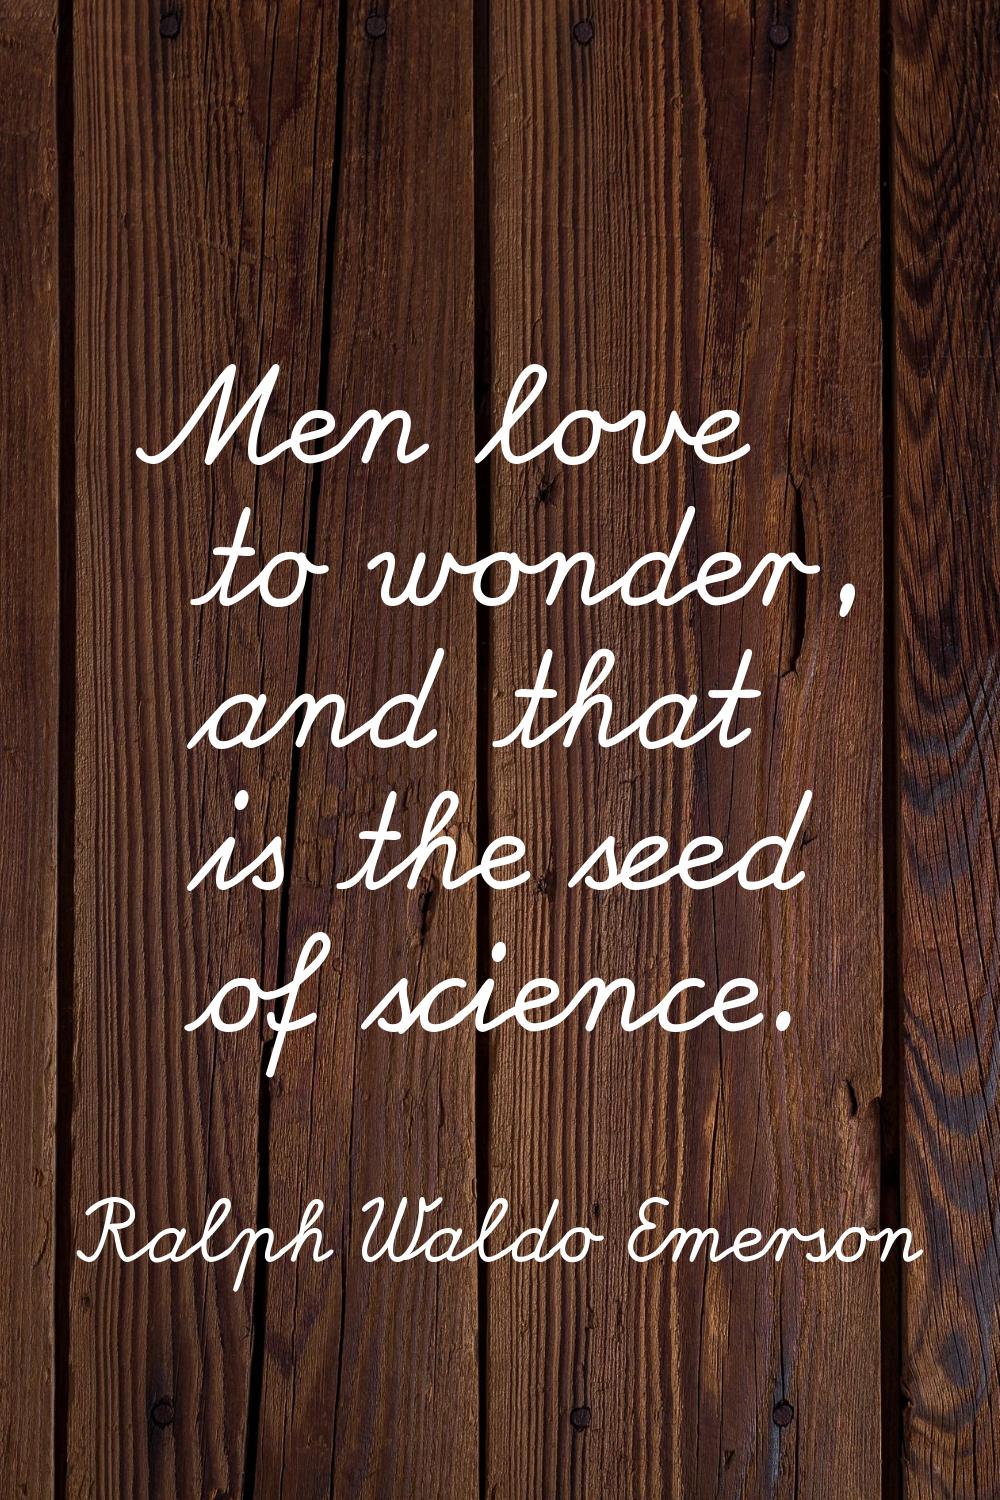 Men love to wonder, and that is the seed of science.